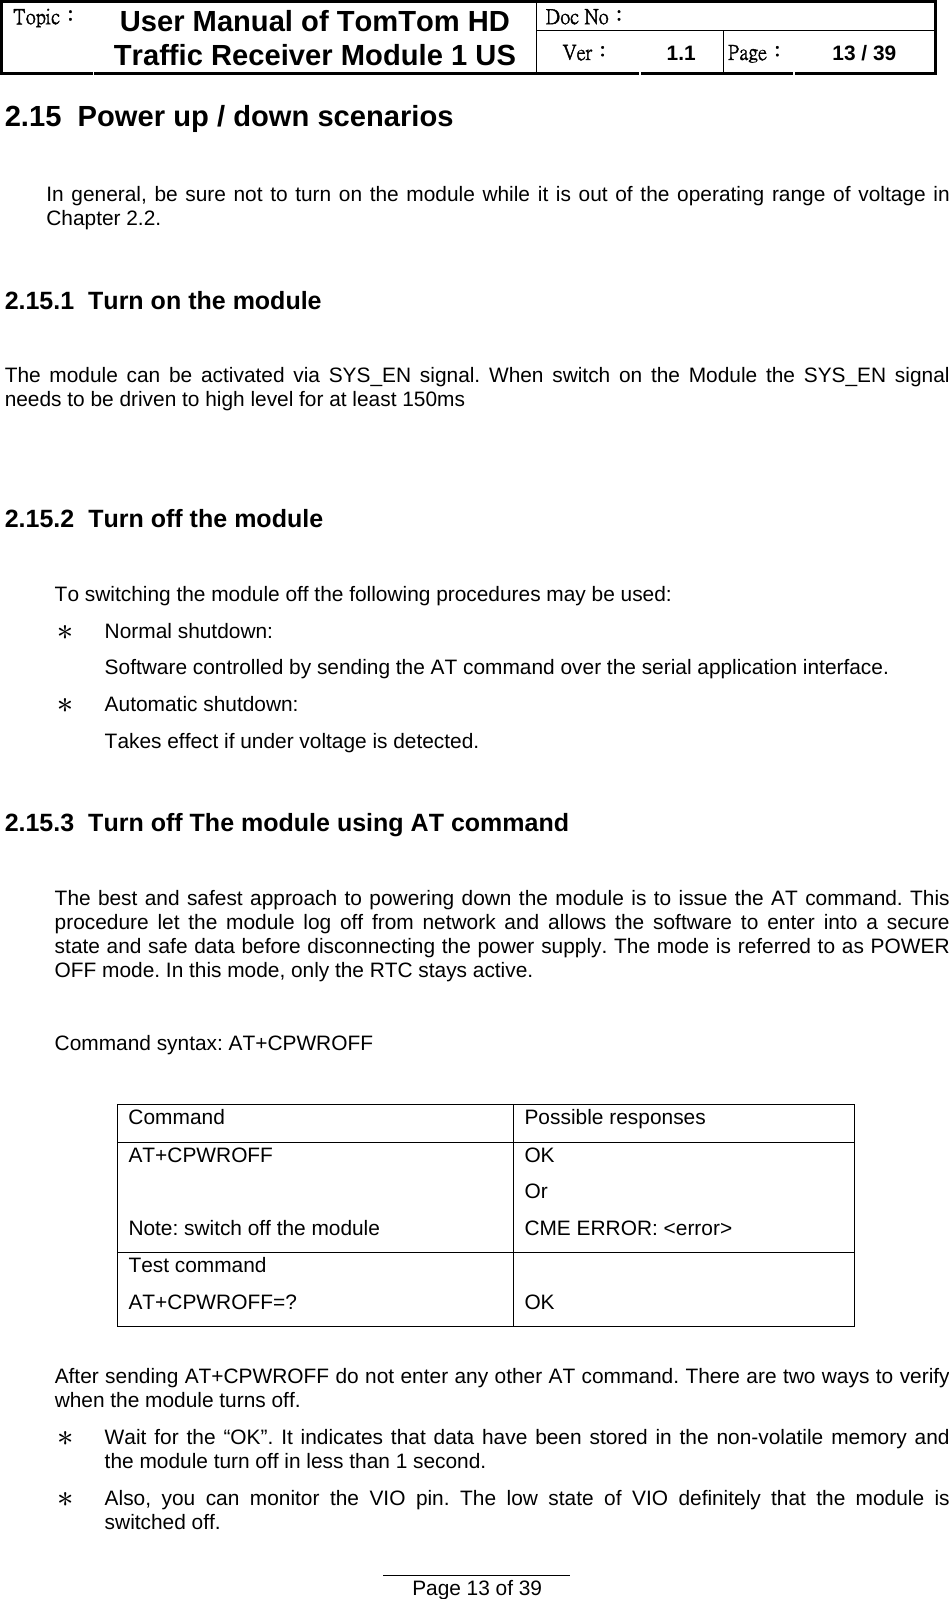 Doc No：  Topic：  User Manual of TomTom HD Traffic Receiver Module 1 US  Ver：  1.1  Page：  13 / 39  Page 13 of 39  2.15  Power up / down scenarios  In general, be sure not to turn on the module while it is out of the operating range of voltage in Chapter 2.2.  2.15.1  Turn on the module   The module can be activated via SYS_EN signal. When switch on the Module the SYS_EN signal needs to be driven to high level for at least 150ms   2.15.2  Turn off the module  To switching the module off the following procedures may be used: ＊ Normal shutdown: Software controlled by sending the AT command over the serial application interface. ＊ Automatic shutdown: Takes effect if under voltage is detected.  2.15.3  Turn off The module using AT command  The best and safest approach to powering down the module is to issue the AT command. This procedure let the module log off from network and allows the software to enter into a secure state and safe data before disconnecting the power supply. The mode is referred to as POWER OFF mode. In this mode, only the RTC stays active.  Command syntax: AT+CPWROFF  Command Possible responses AT+CPWROFF  Note: switch off the module OK Or CME ERROR: &lt;error&gt; Test command AT+CPWROFF=?  OK  After sending AT+CPWROFF do not enter any other AT command. There are two ways to verify when the module turns off. ＊ Wait for the “OK”. It indicates that data have been stored in the non-volatile memory and the module turn off in less than 1 second. ＊ Also, you can monitor the VIO pin. The low state of VIO definitely that the module is switched off. 